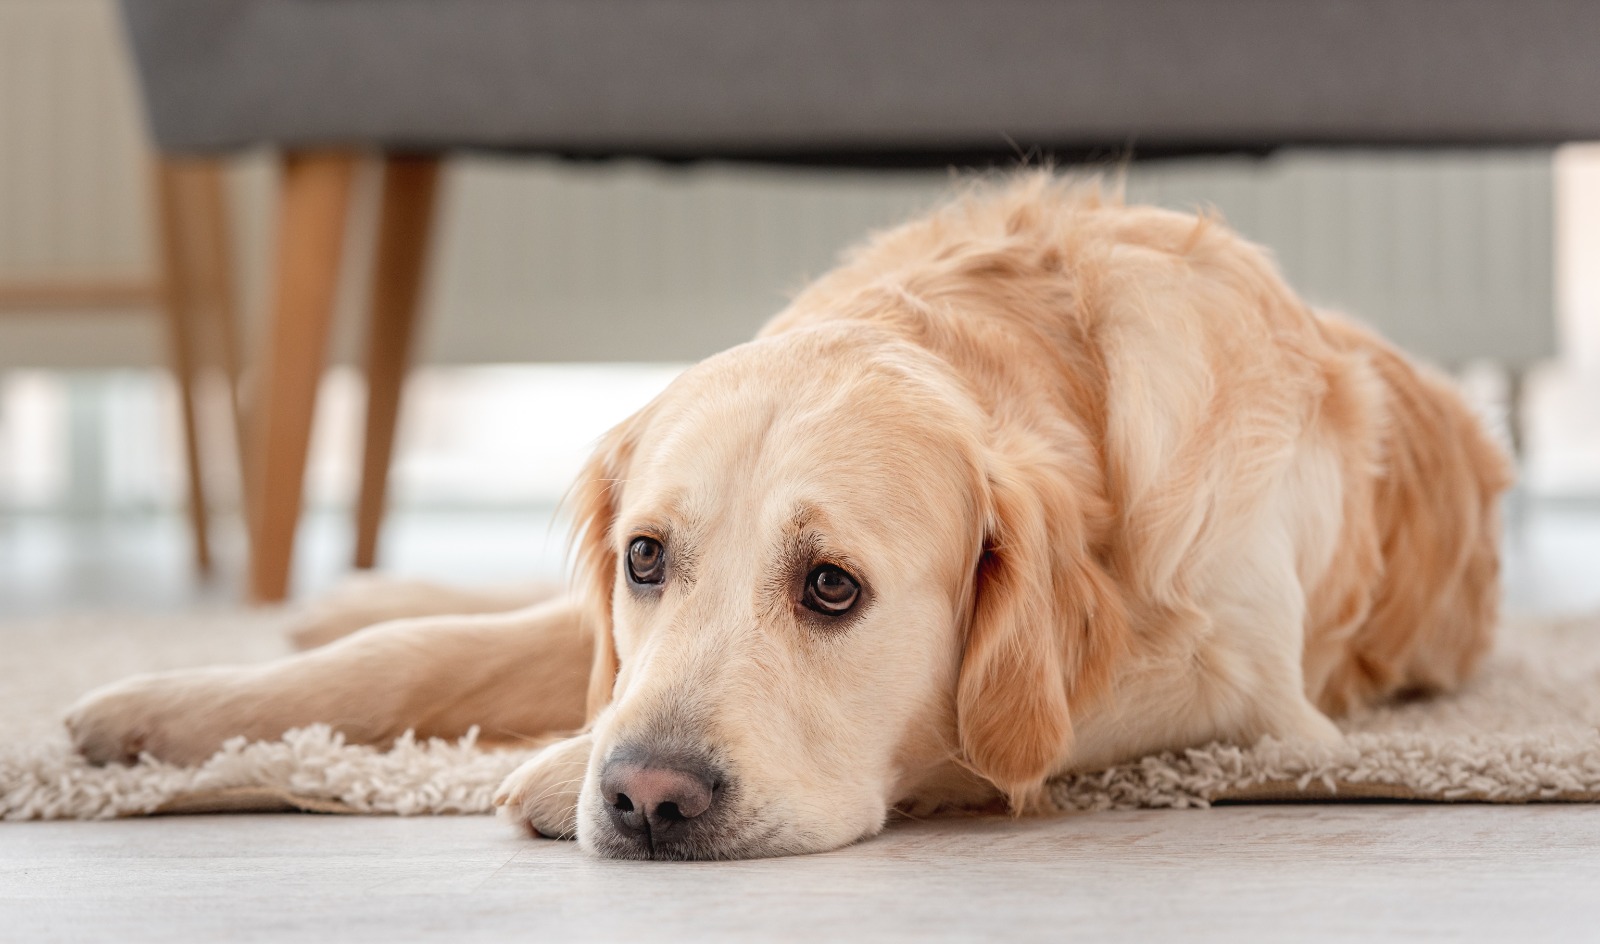 What are good ways to help with joint pain in older dogs? 